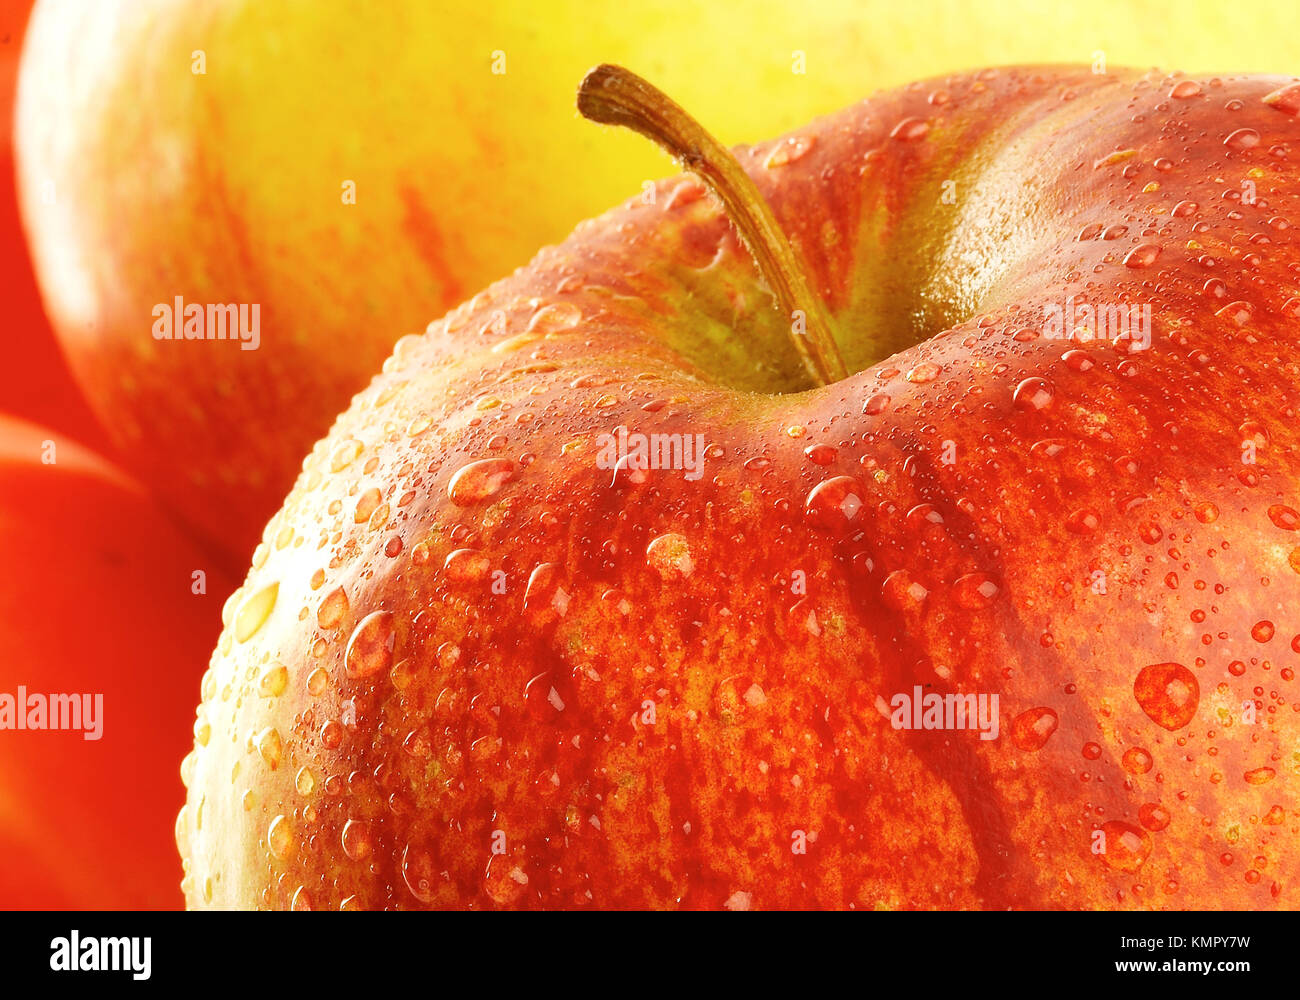 Fresh apple with drops of water. Stock Photo